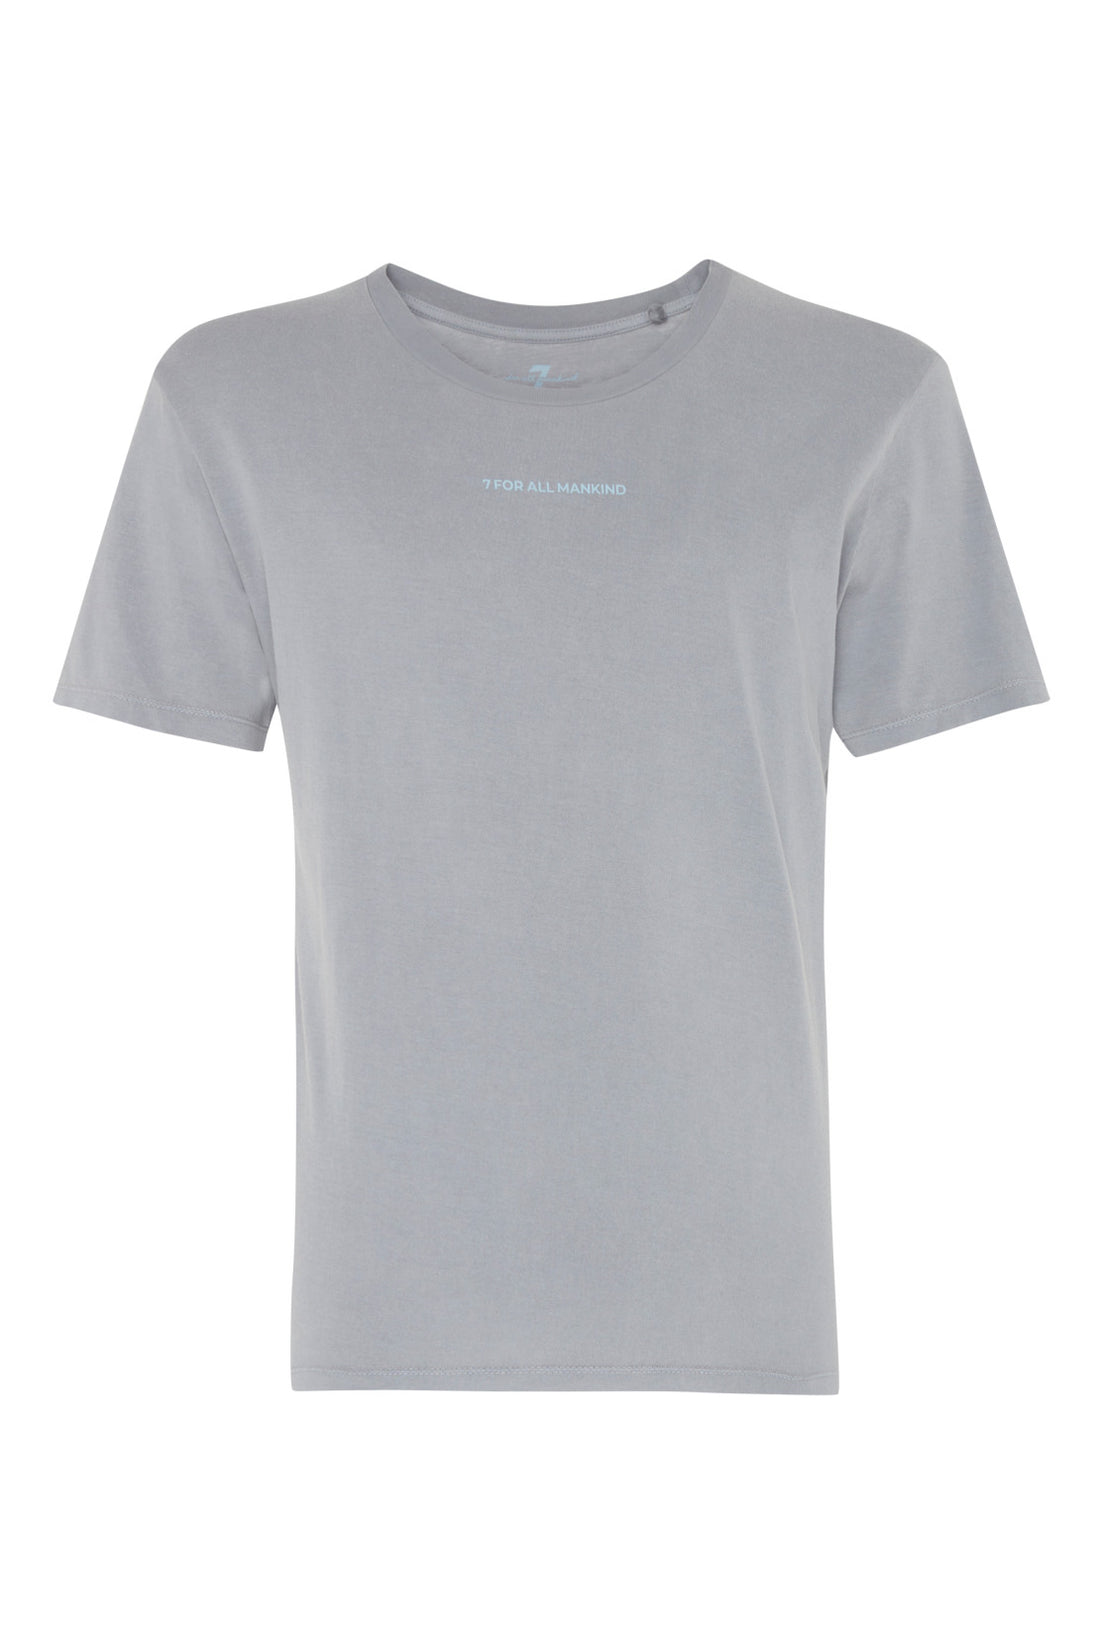 Tee Mineral Dye French Blue